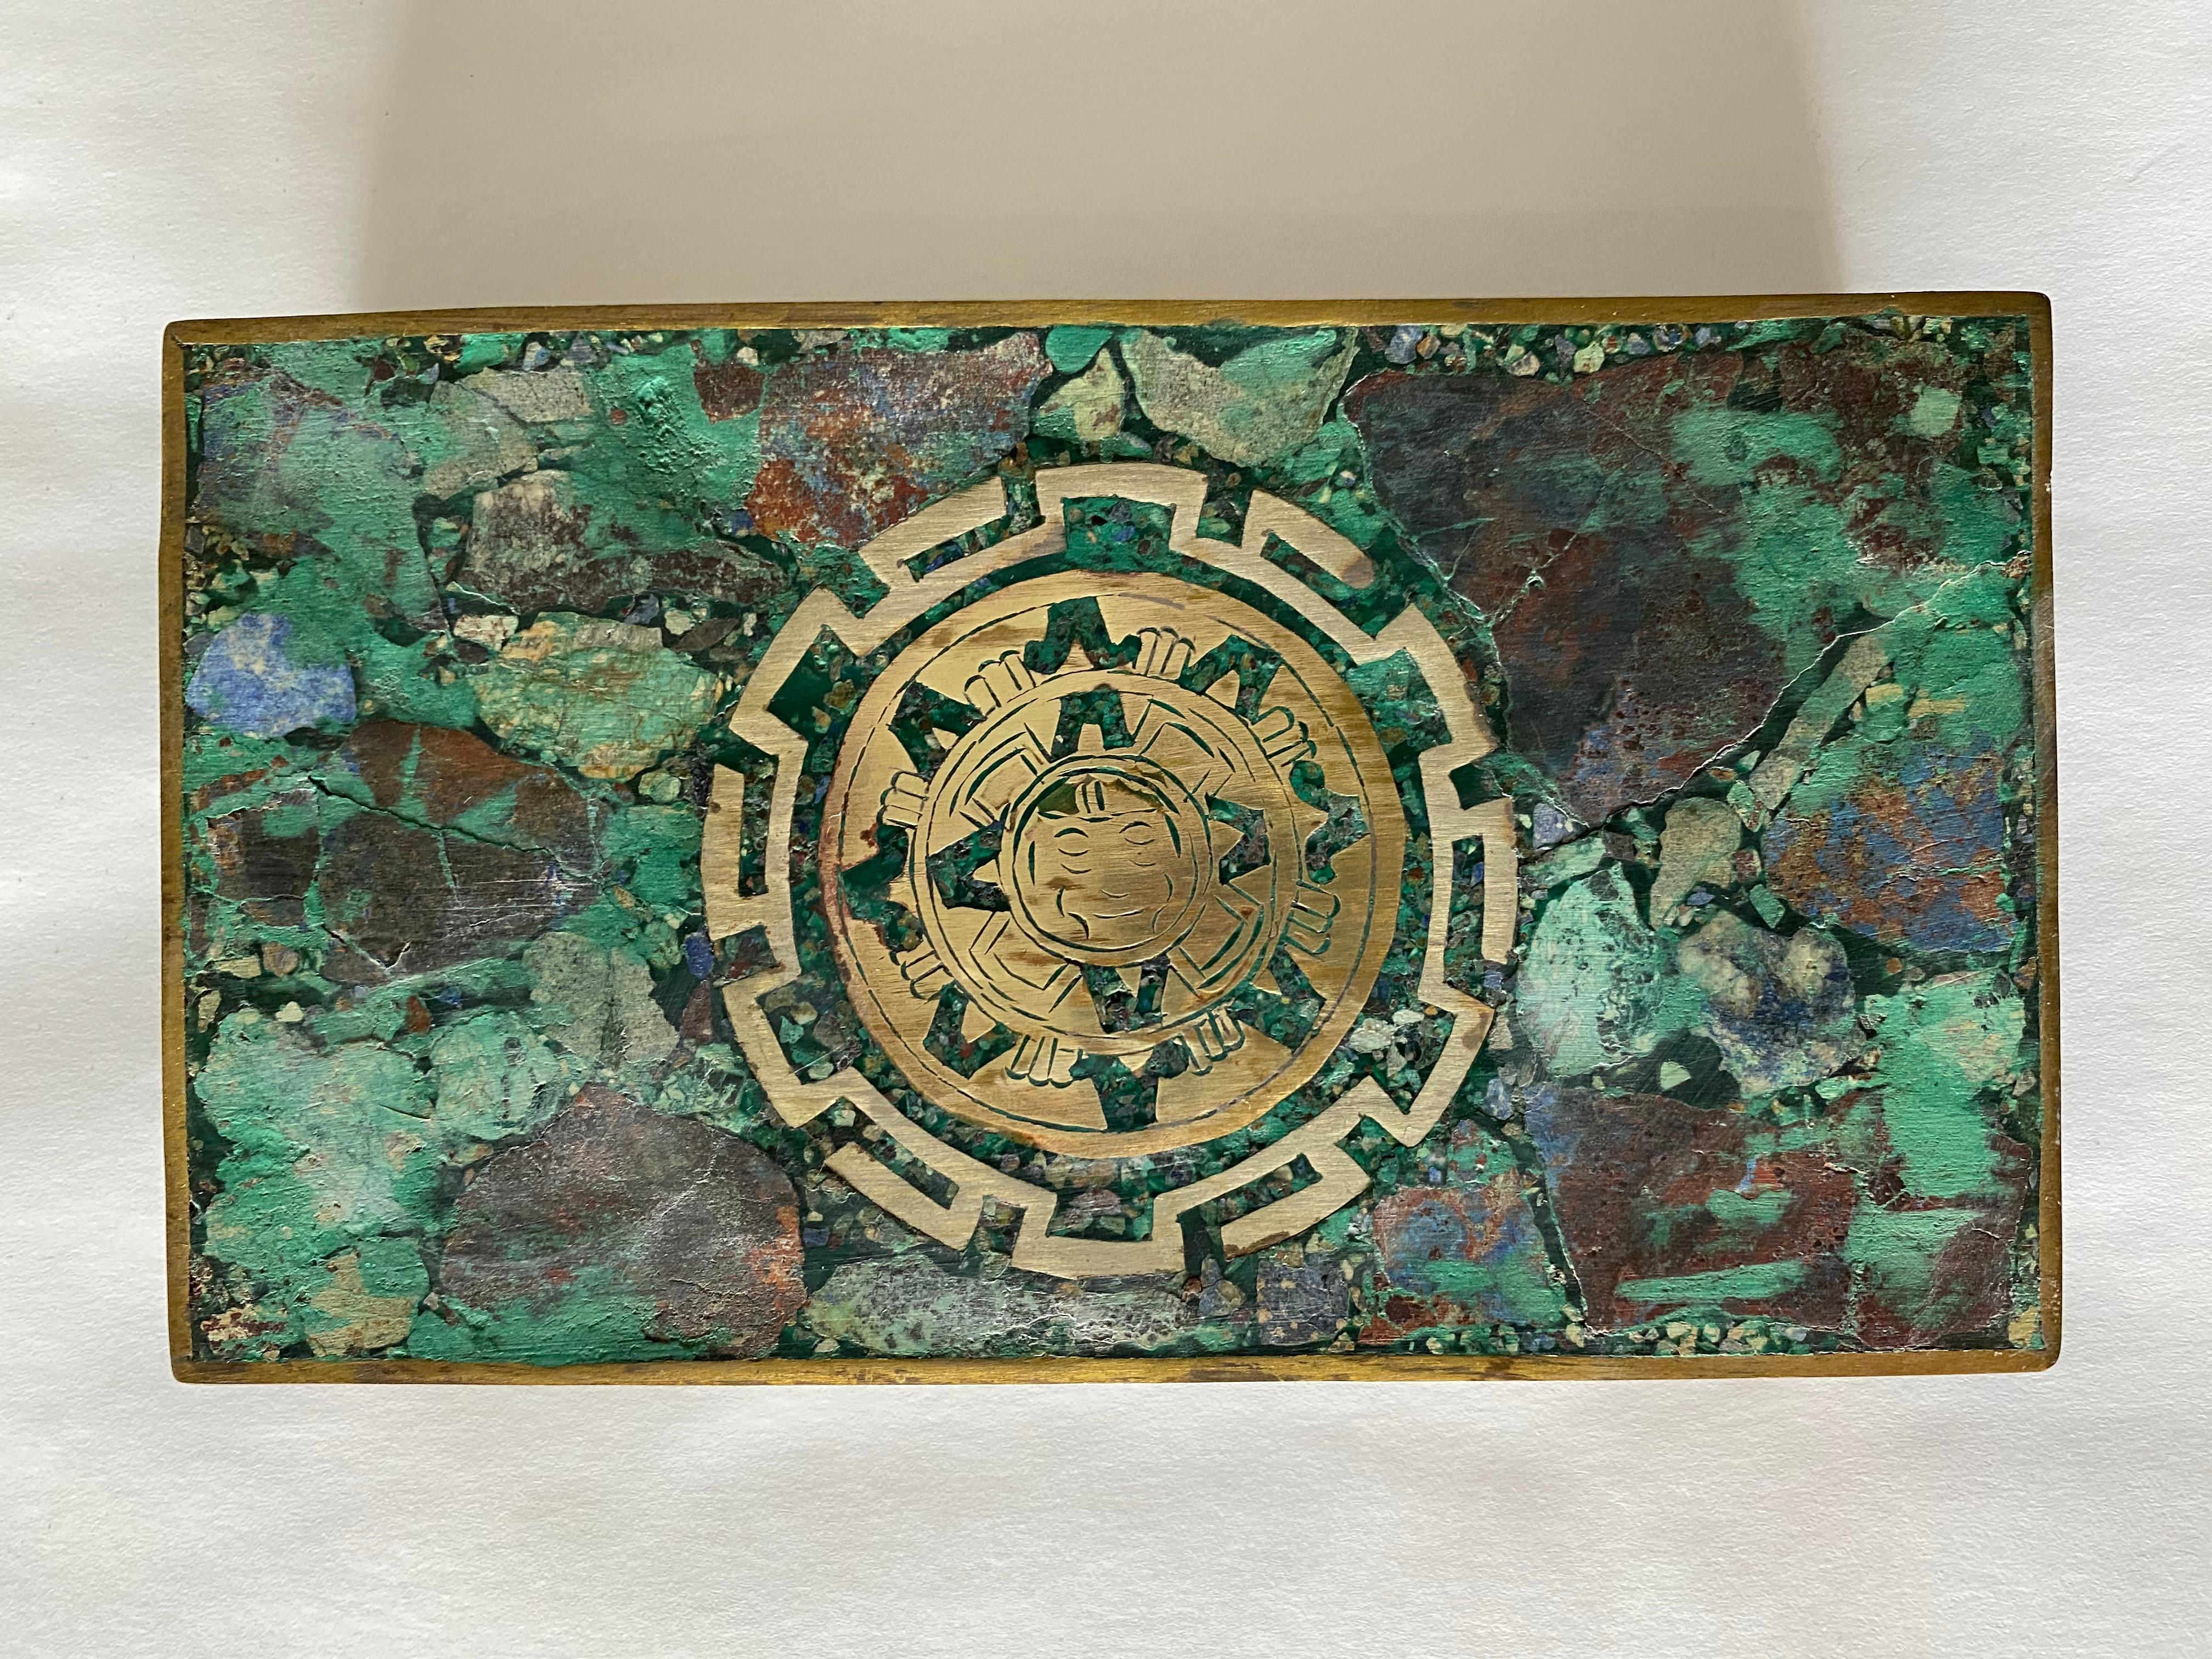 Hinged inlaid malachite and sodalite (looks like lapis lazuli) brass metal box with rosewood interior. The inlaid design is a stylized Aztec calendar wheel. The metalsmiths of Taxco, Mexico were known for producing this type of cigar box in the